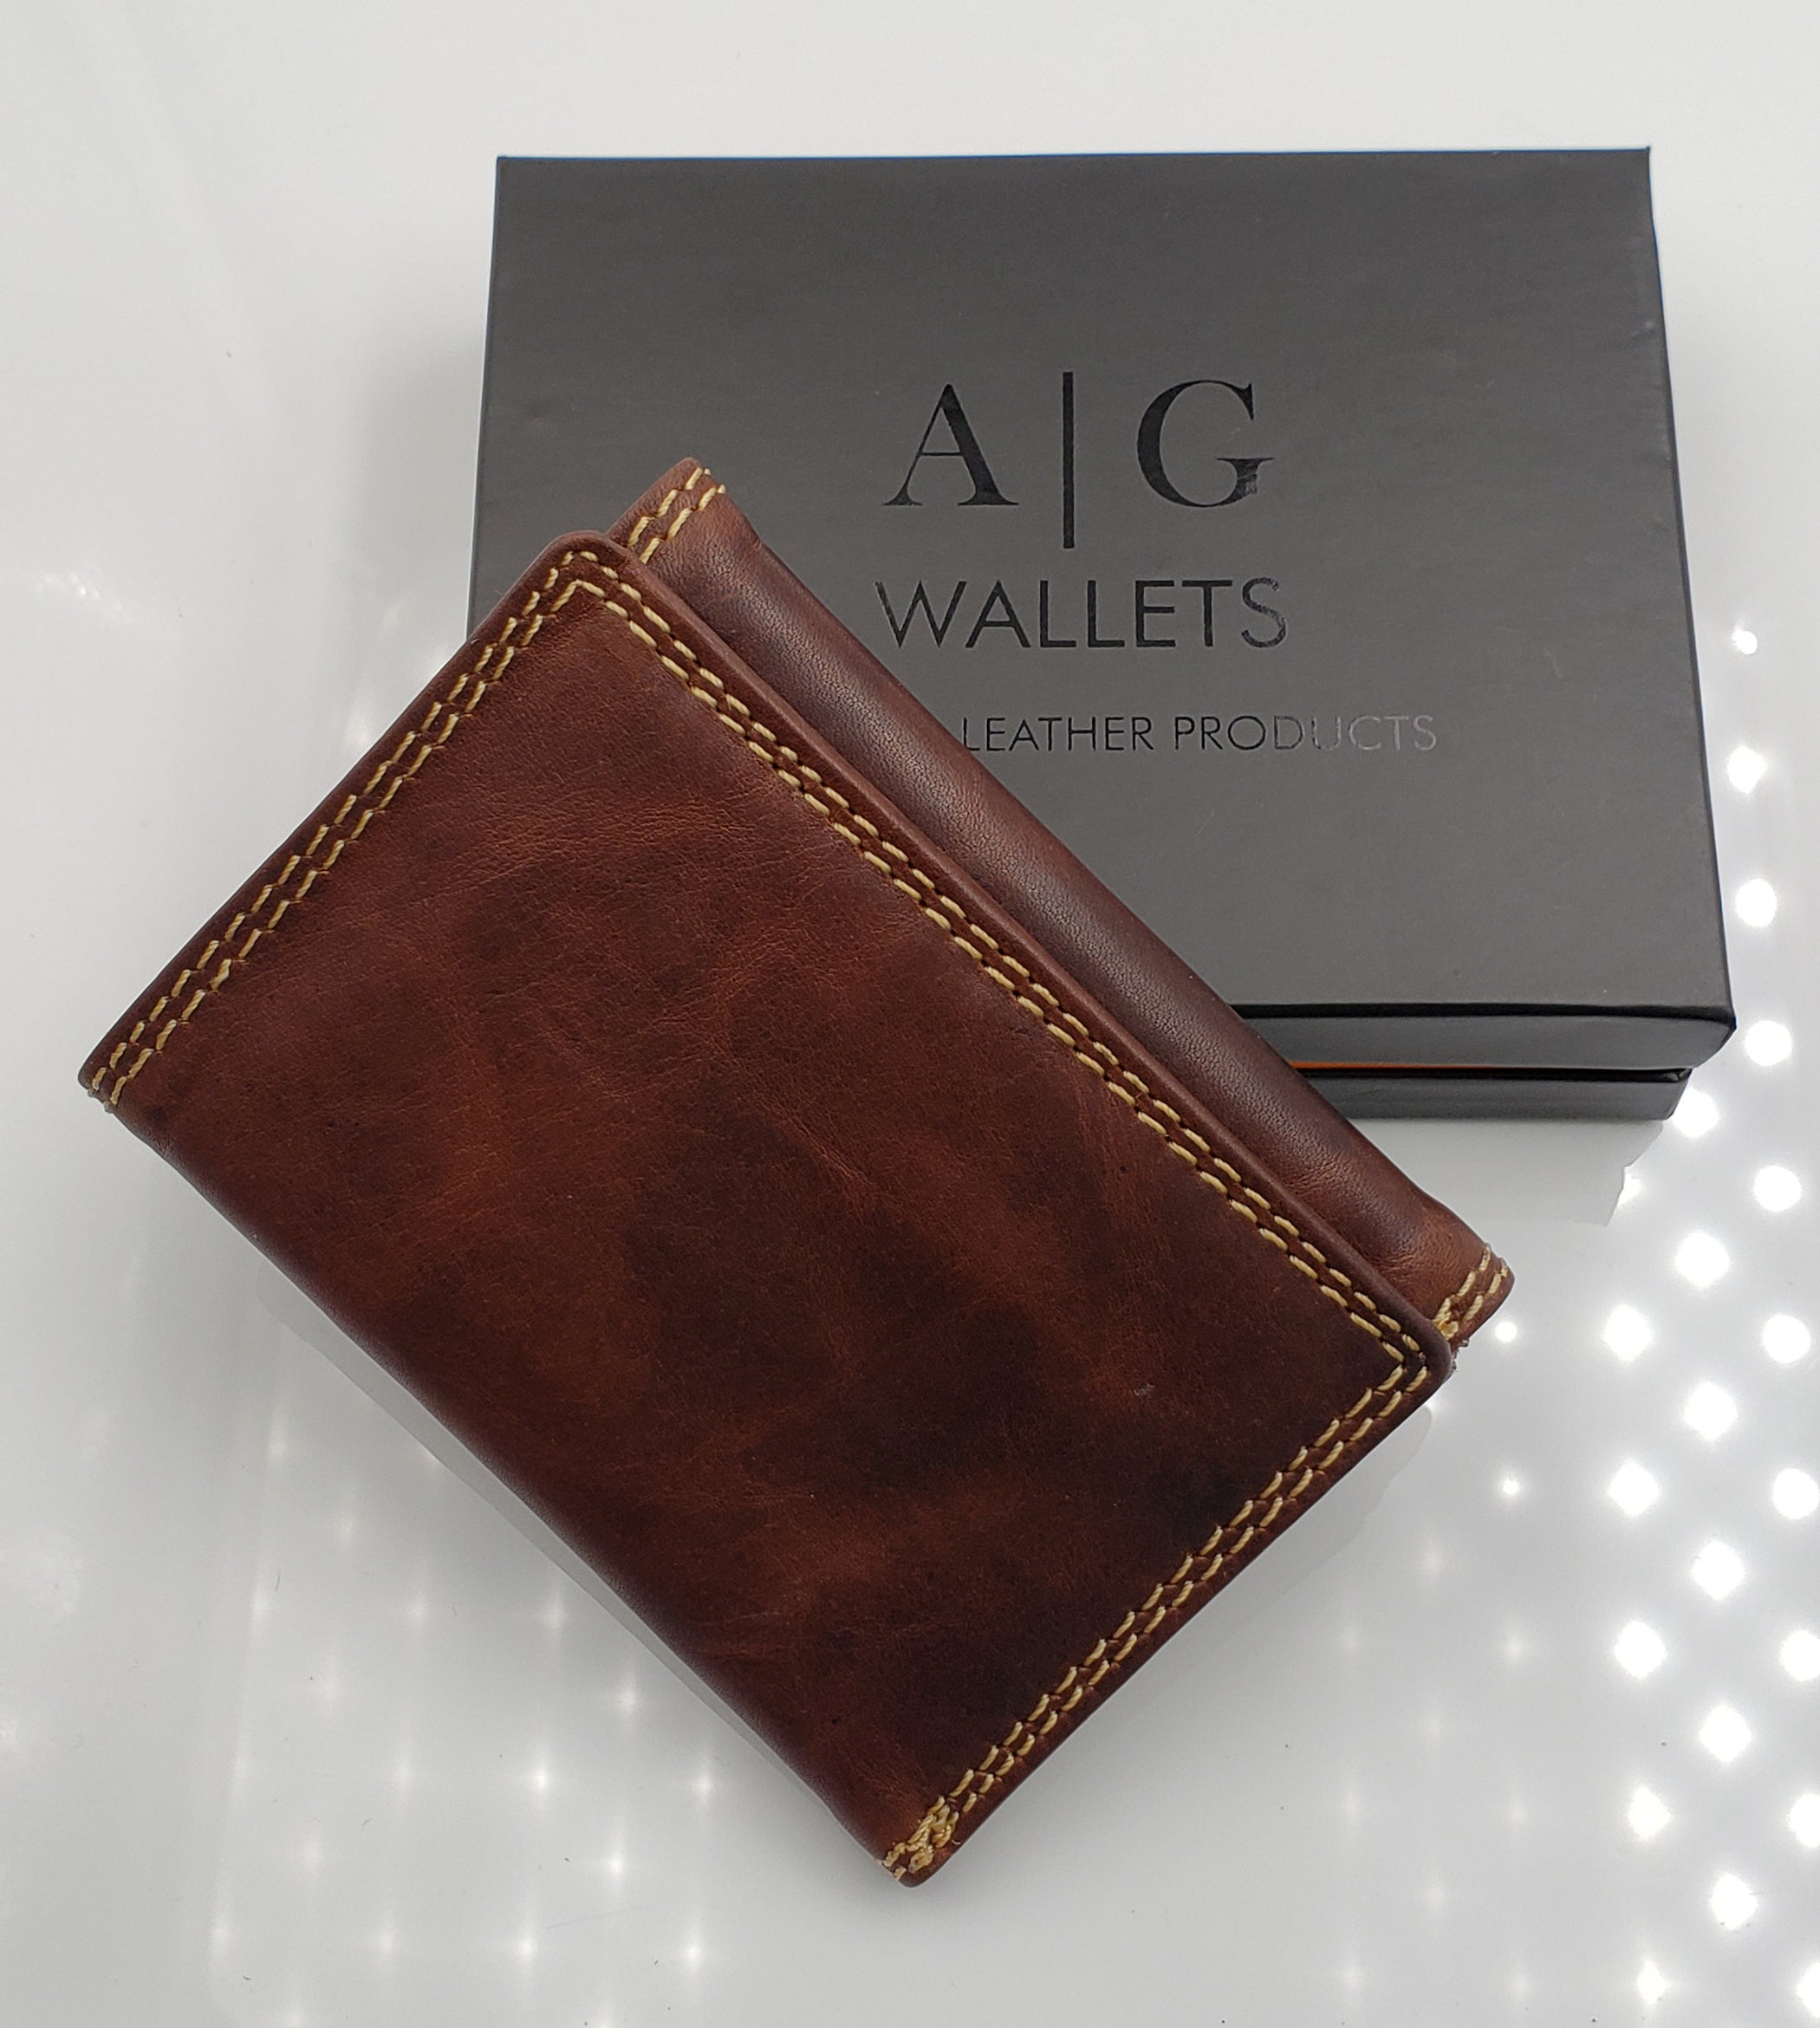 AG Wallets Vintage Leather Trifold Wallet